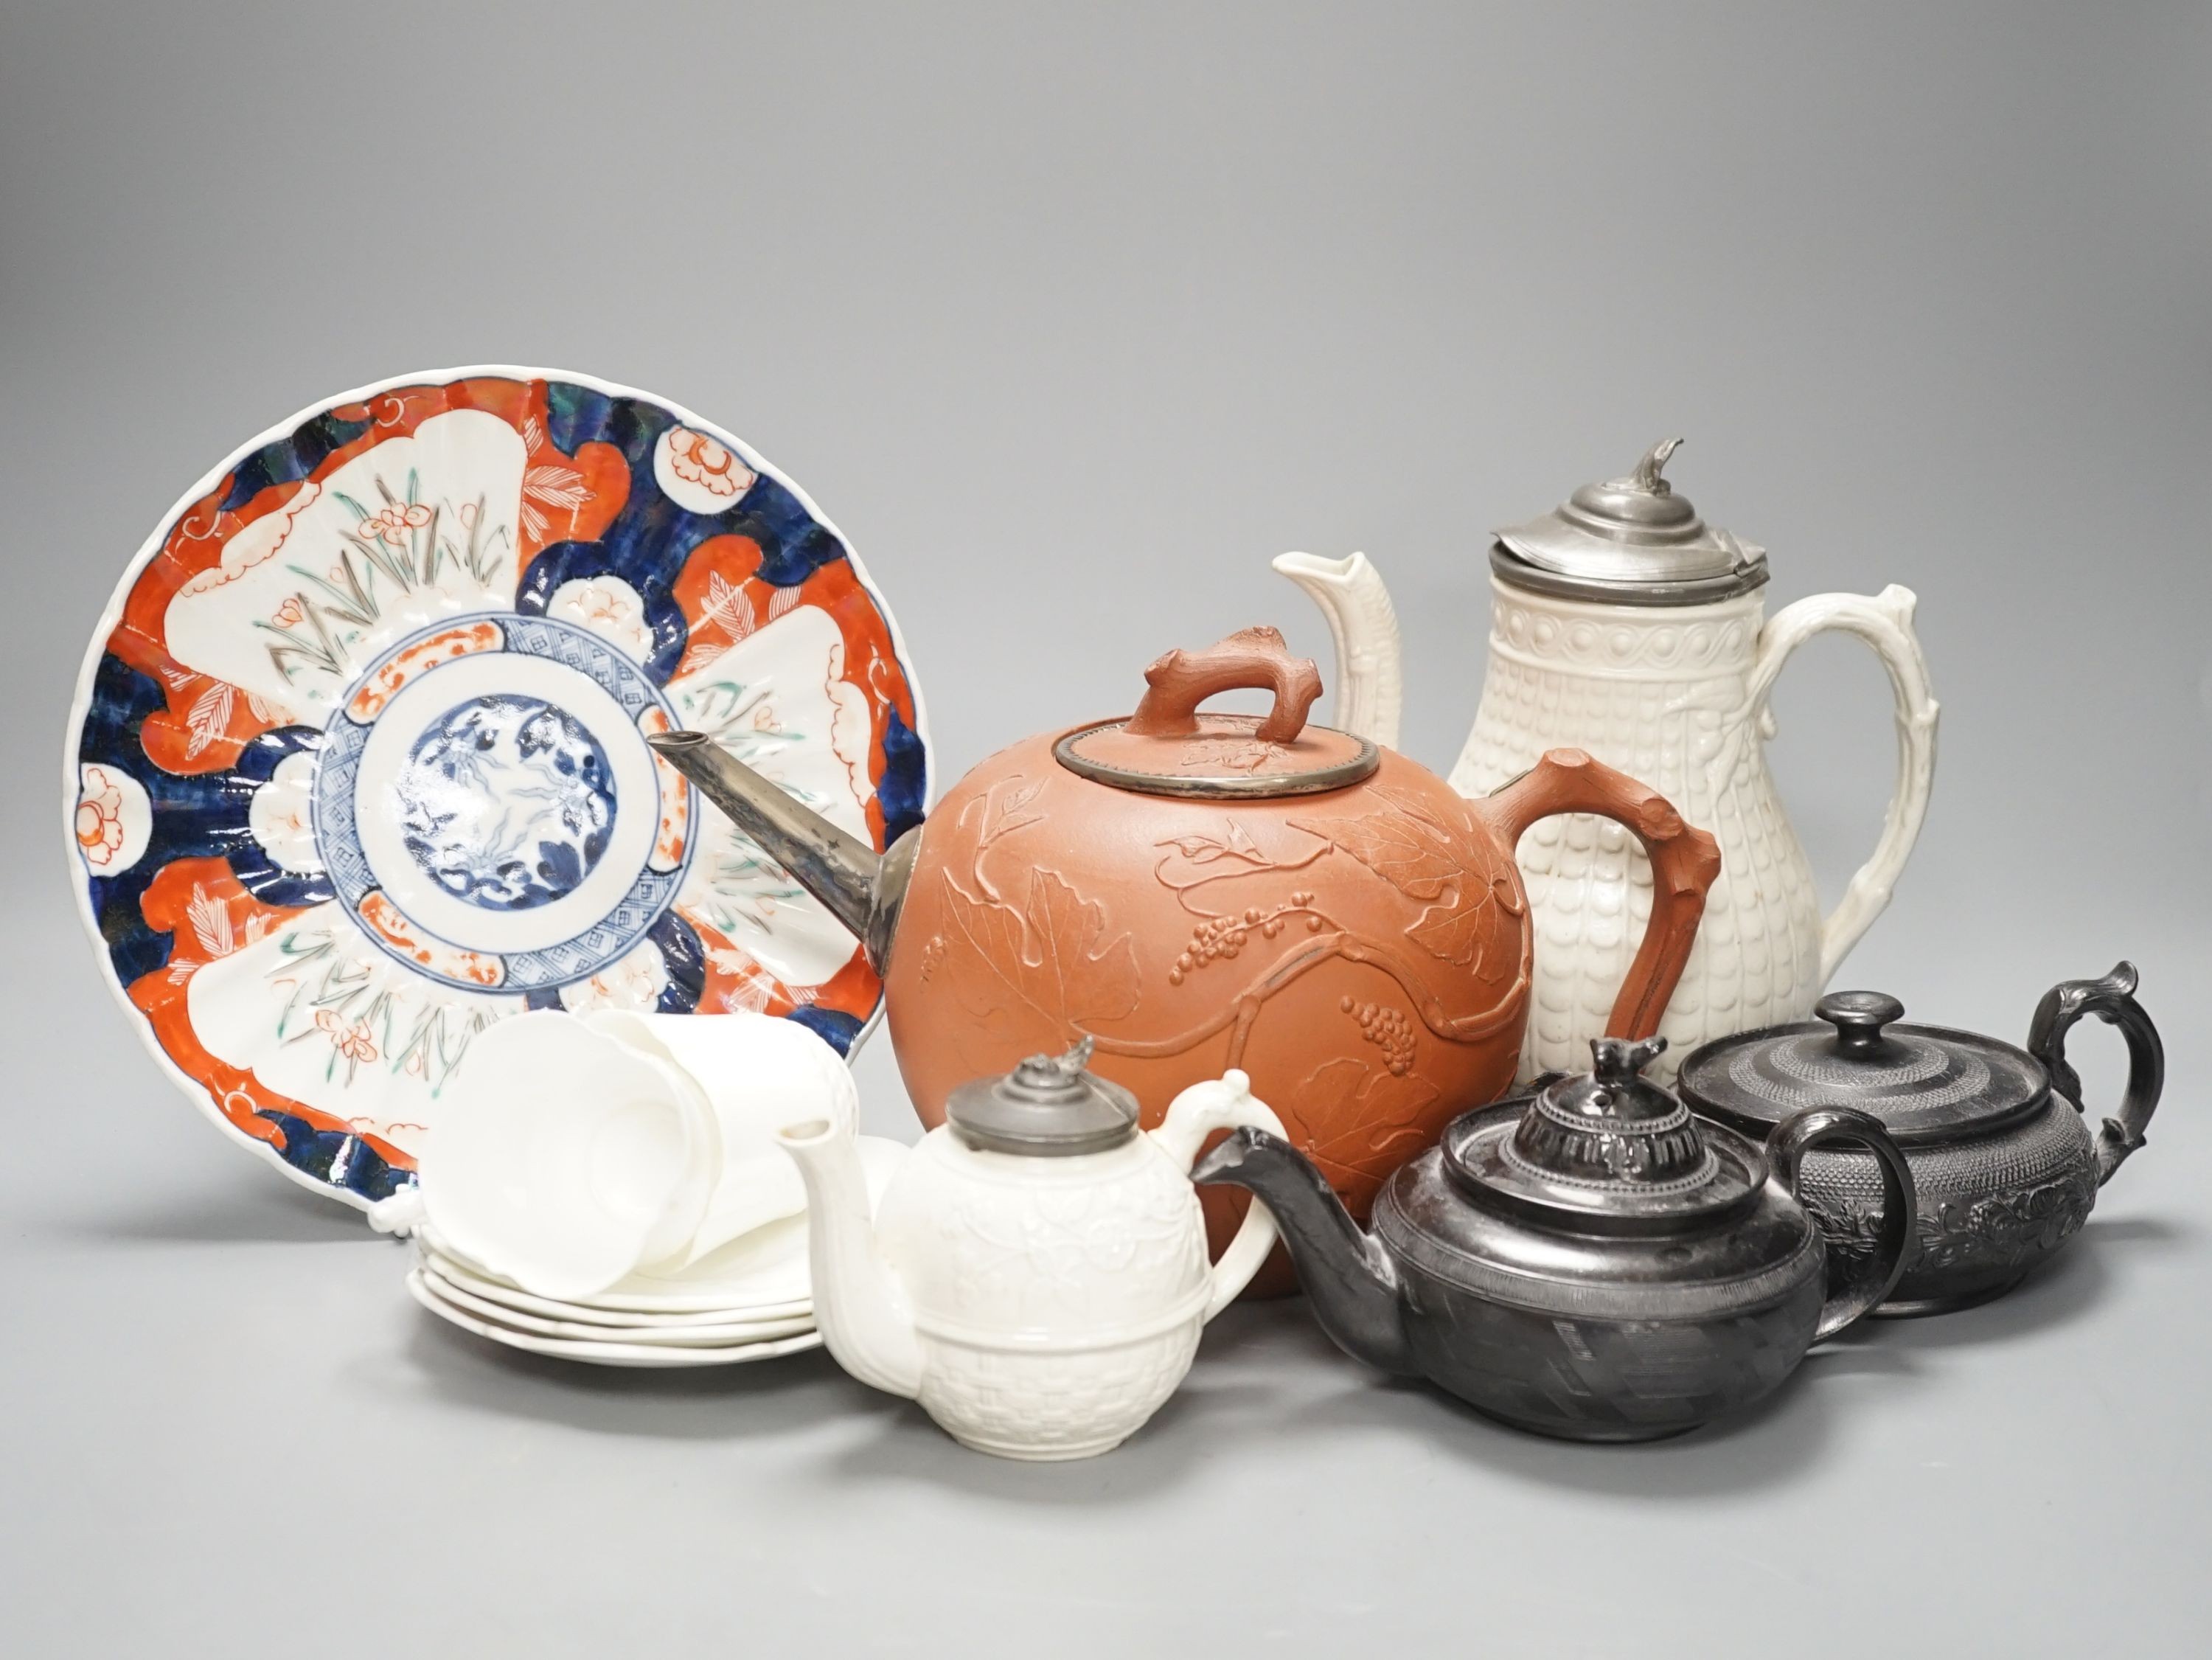 Four 19th century black basalt or black glazed pottery teapots, a large red ware teapot, a creamware dish and a Royal Worcester pot pourri, and other ceramics, tallest 27.5cm